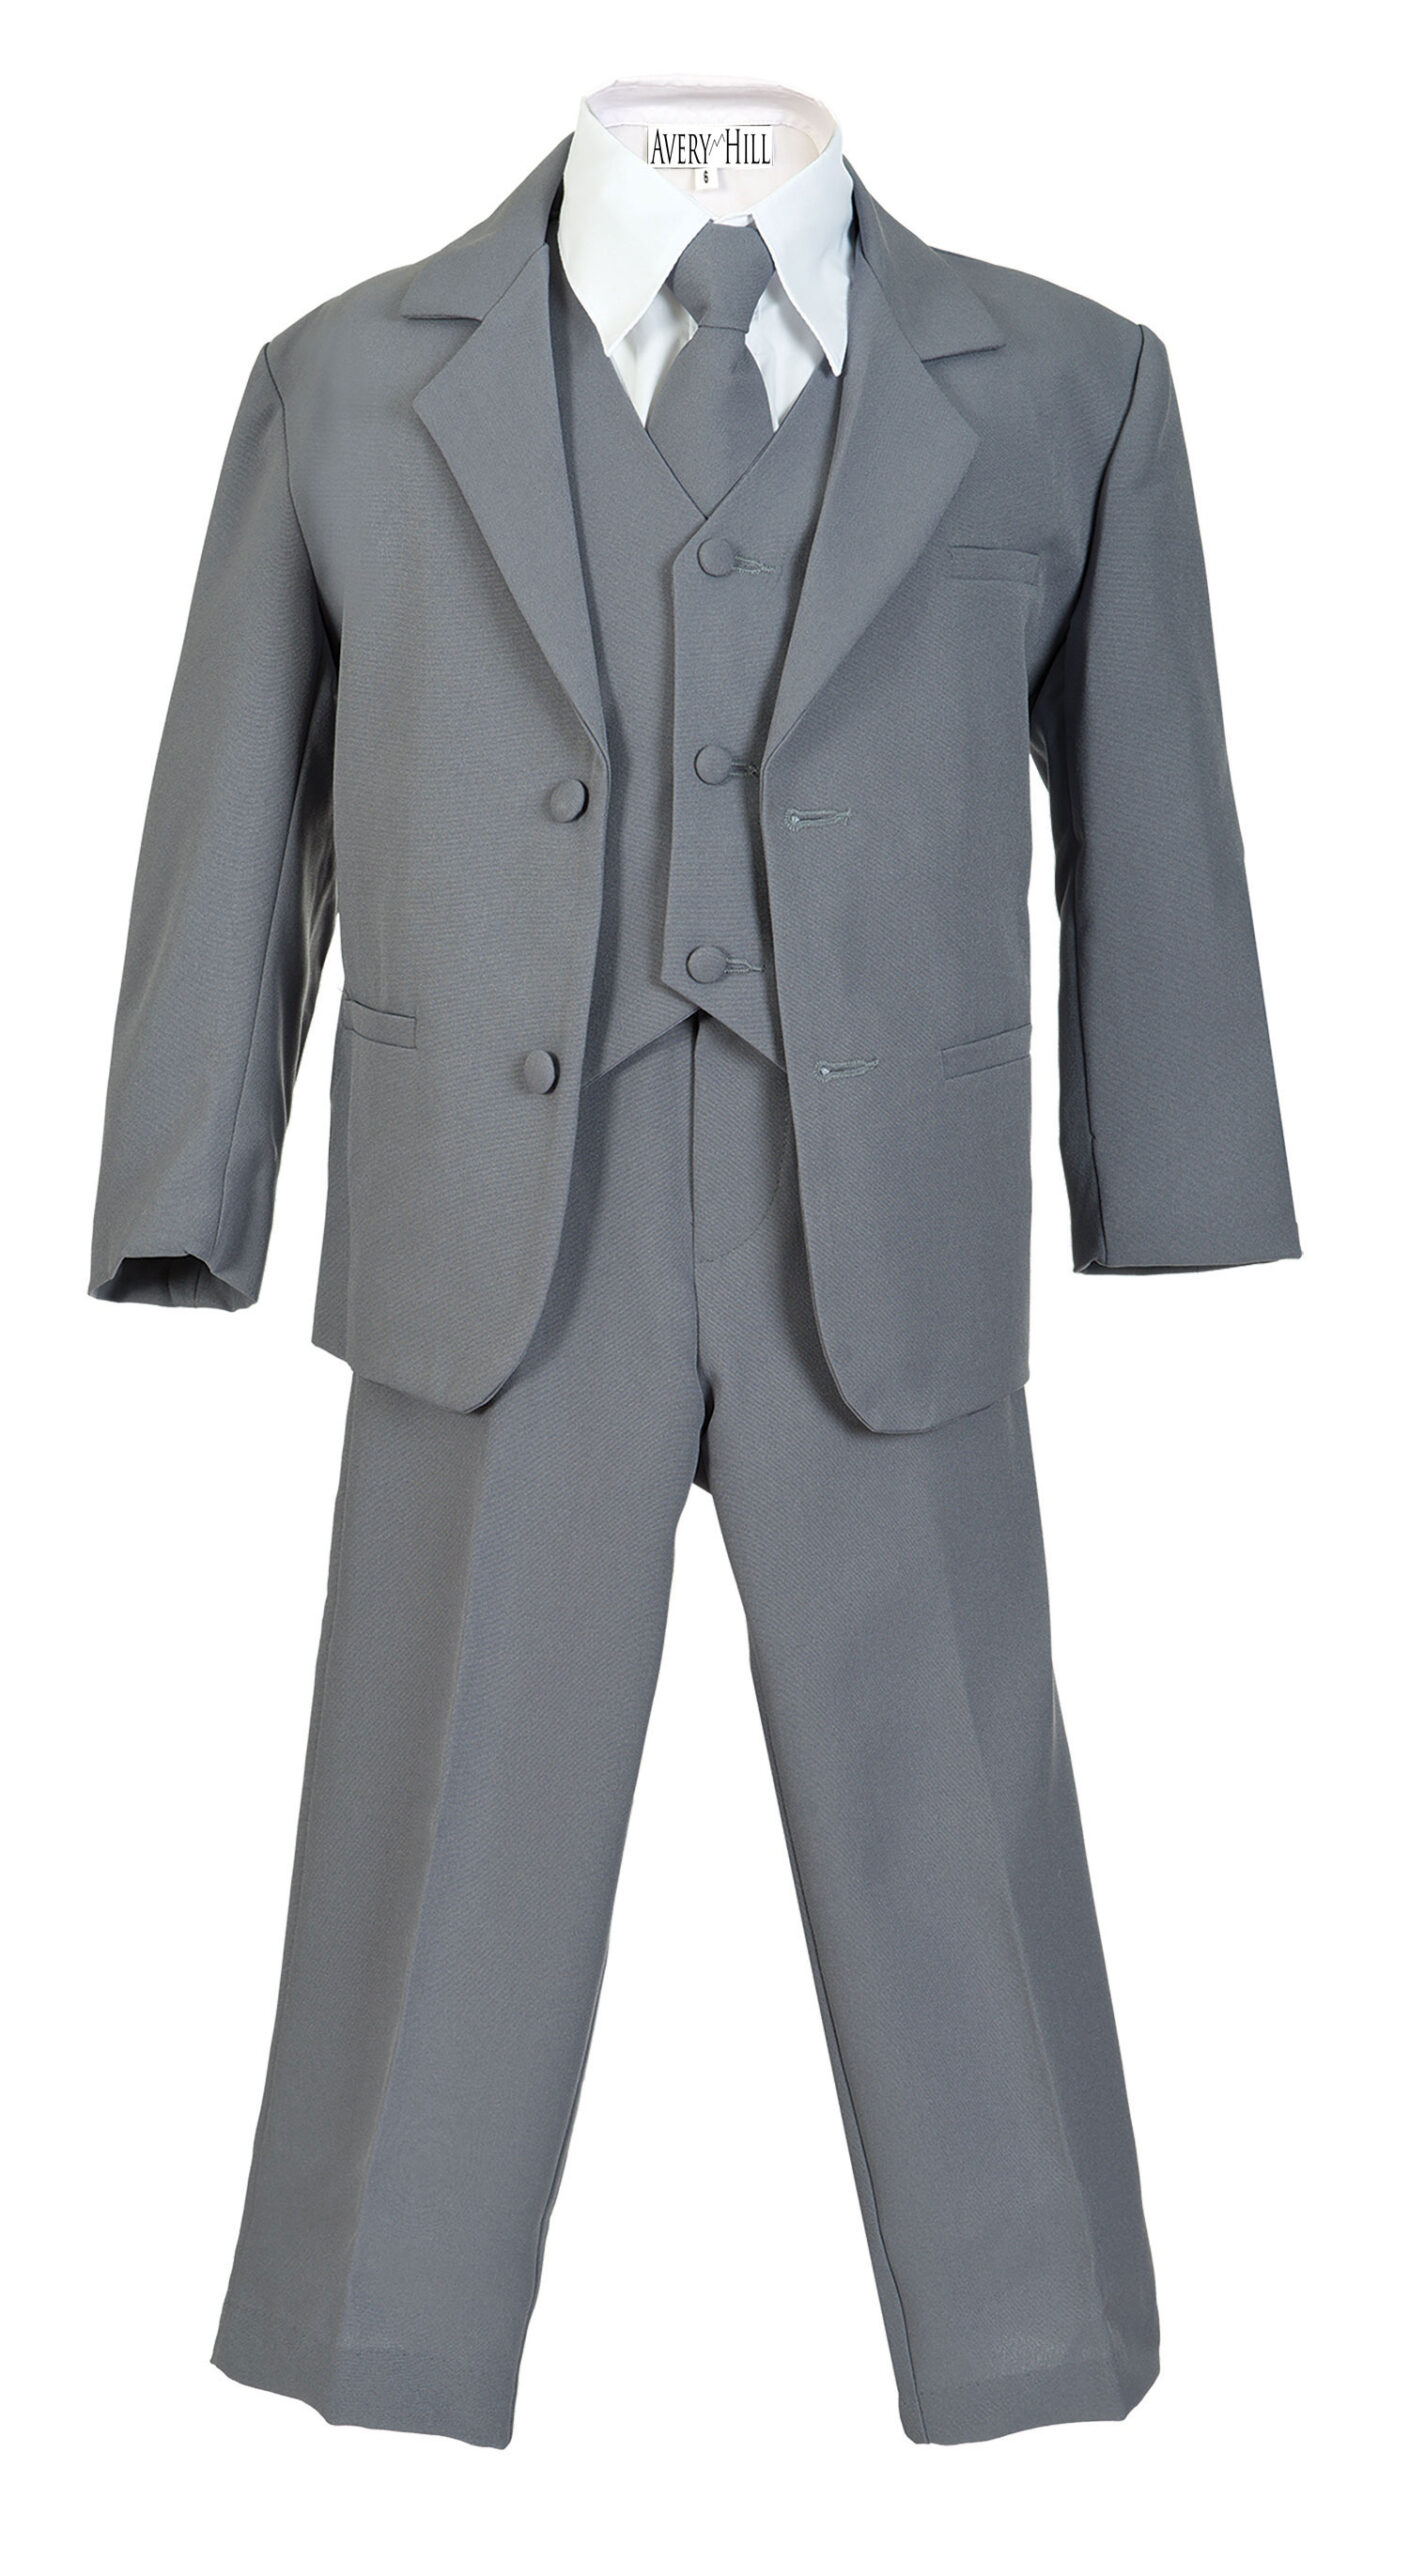 Avery Hill Boys Formal 5 Piece Suit with Shirt and Vest Slate Gray - 7